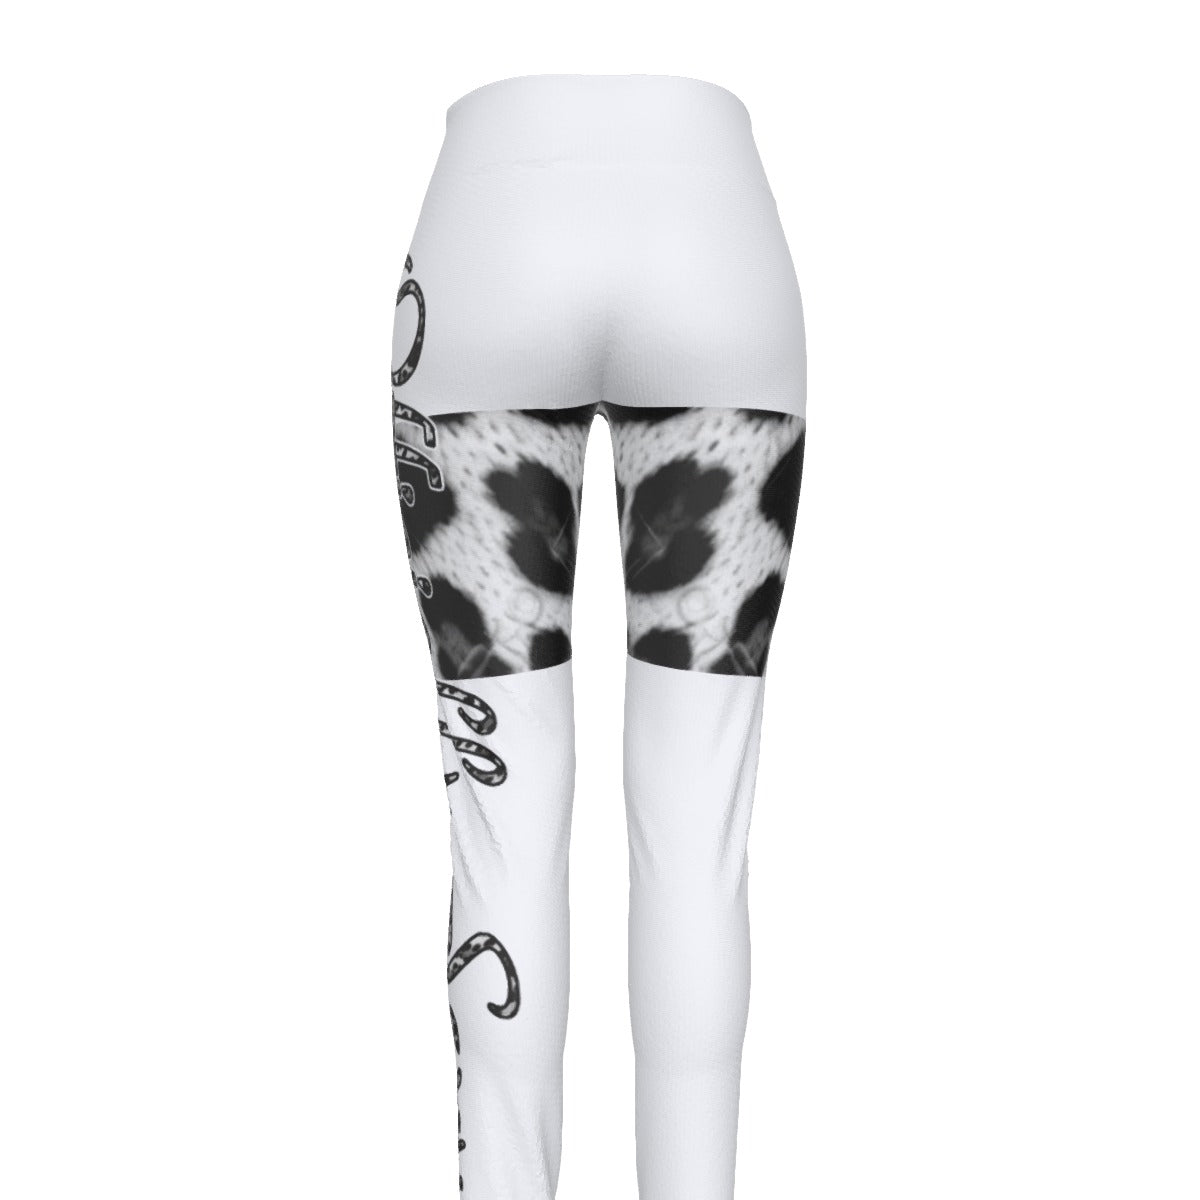 Officially Sexy Snow Leopard Print Collection Women's White High Waist Booty Popper Leggings 2 #2 (English) 3